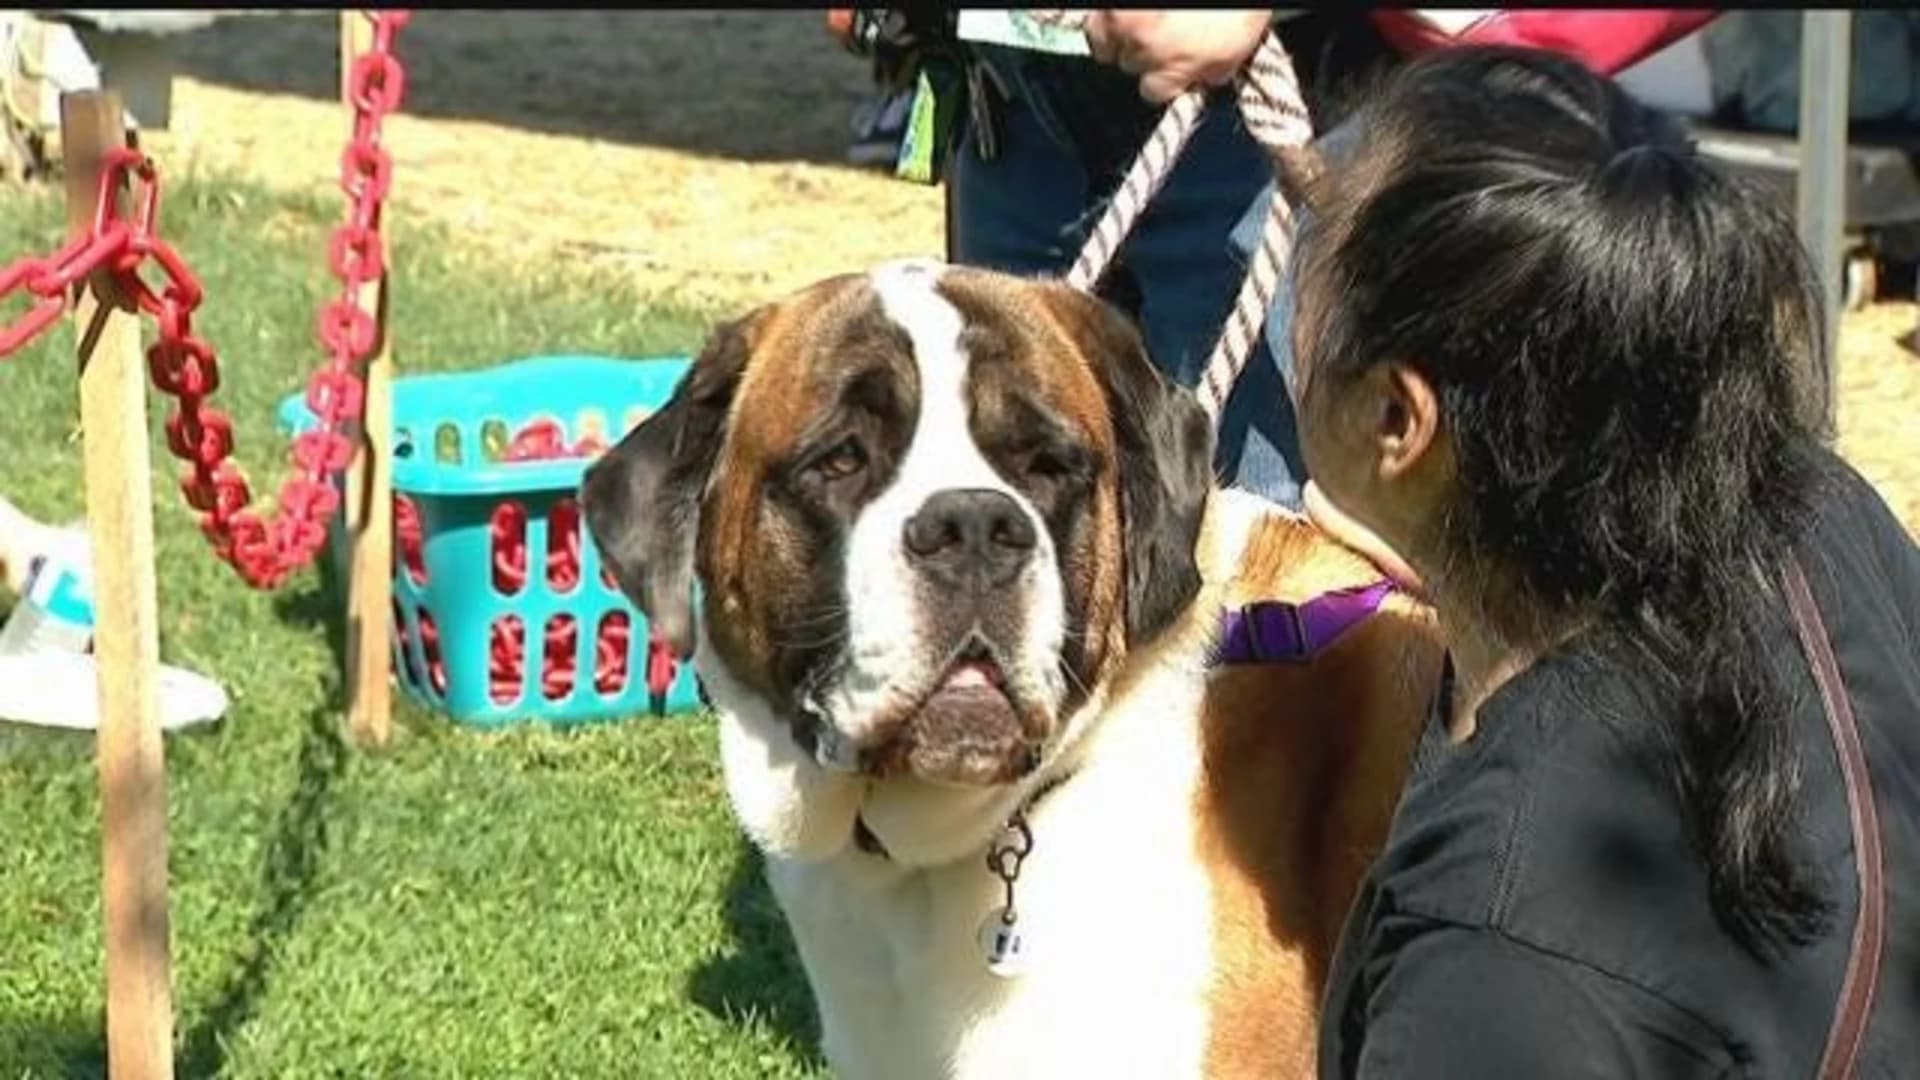 Dog owners bring their pups out to downtown Stamford for annual Bark in the Park event